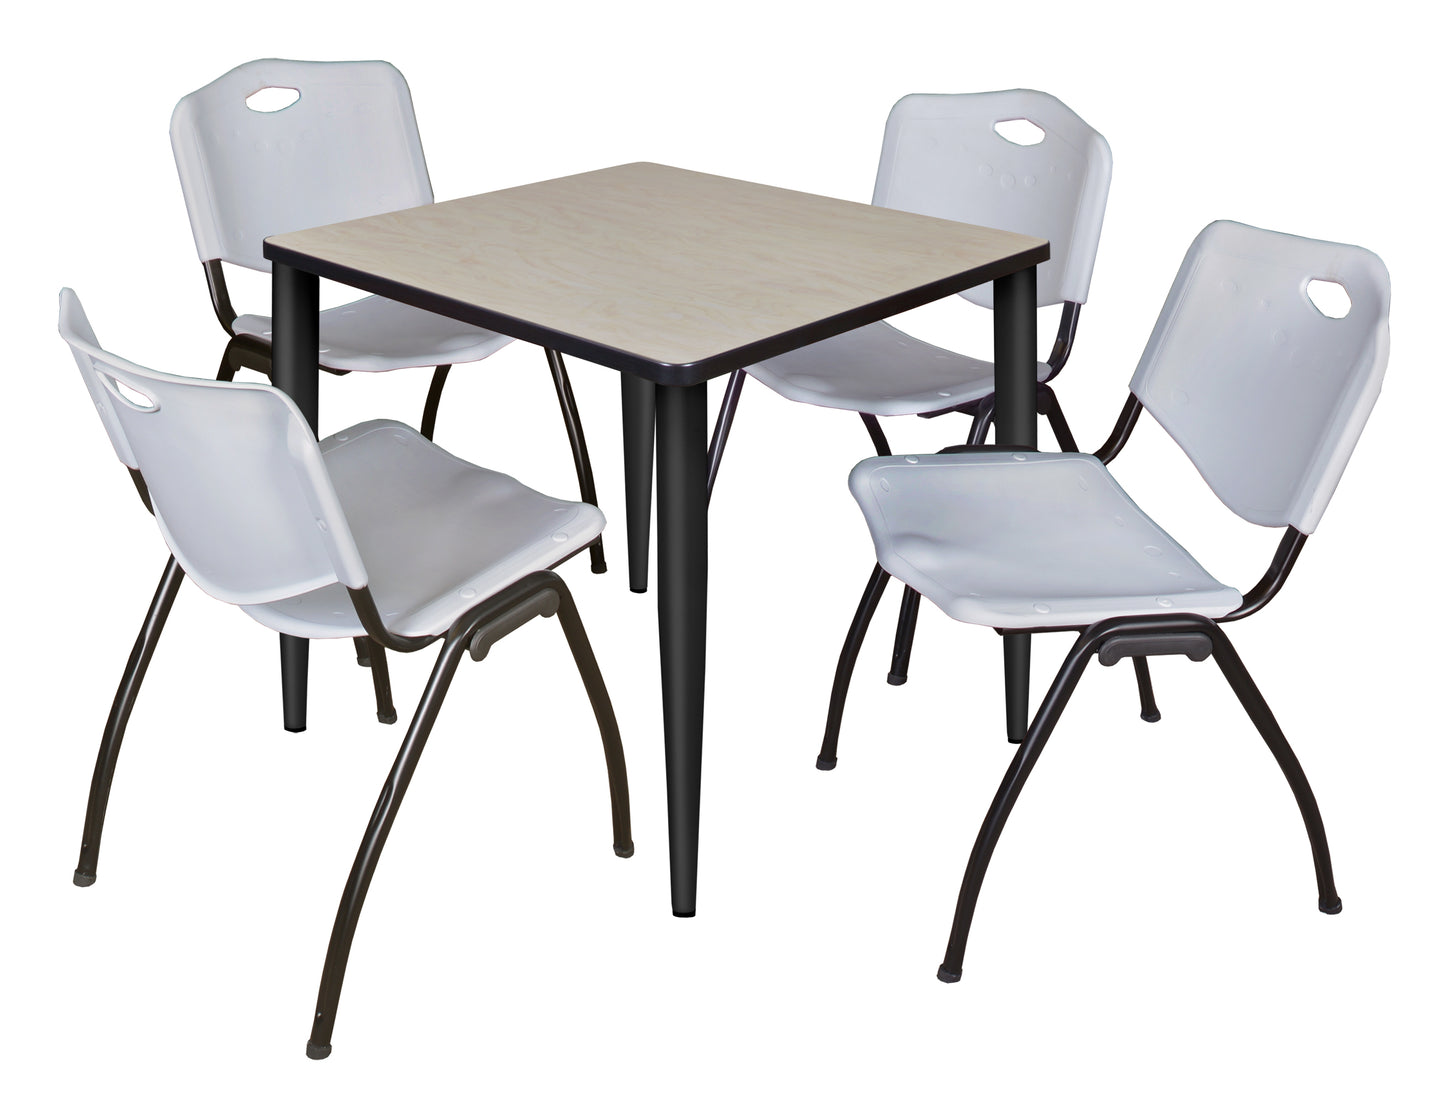 Regency Kahlo 30 in. Square Breakroom Table & 4 M Stack Chairs